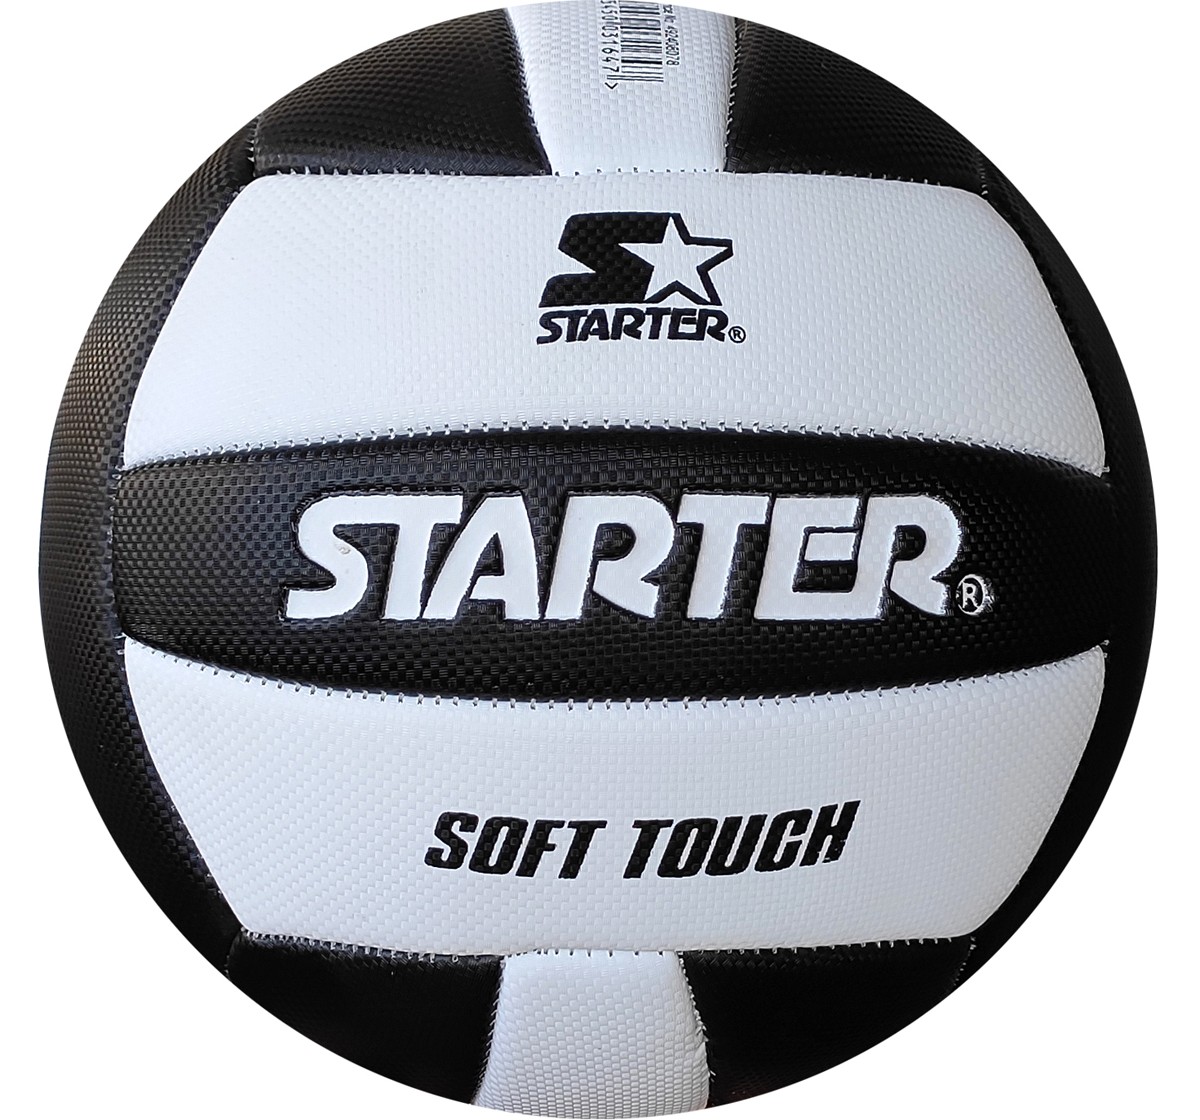 Starter Volleyball Soft touch